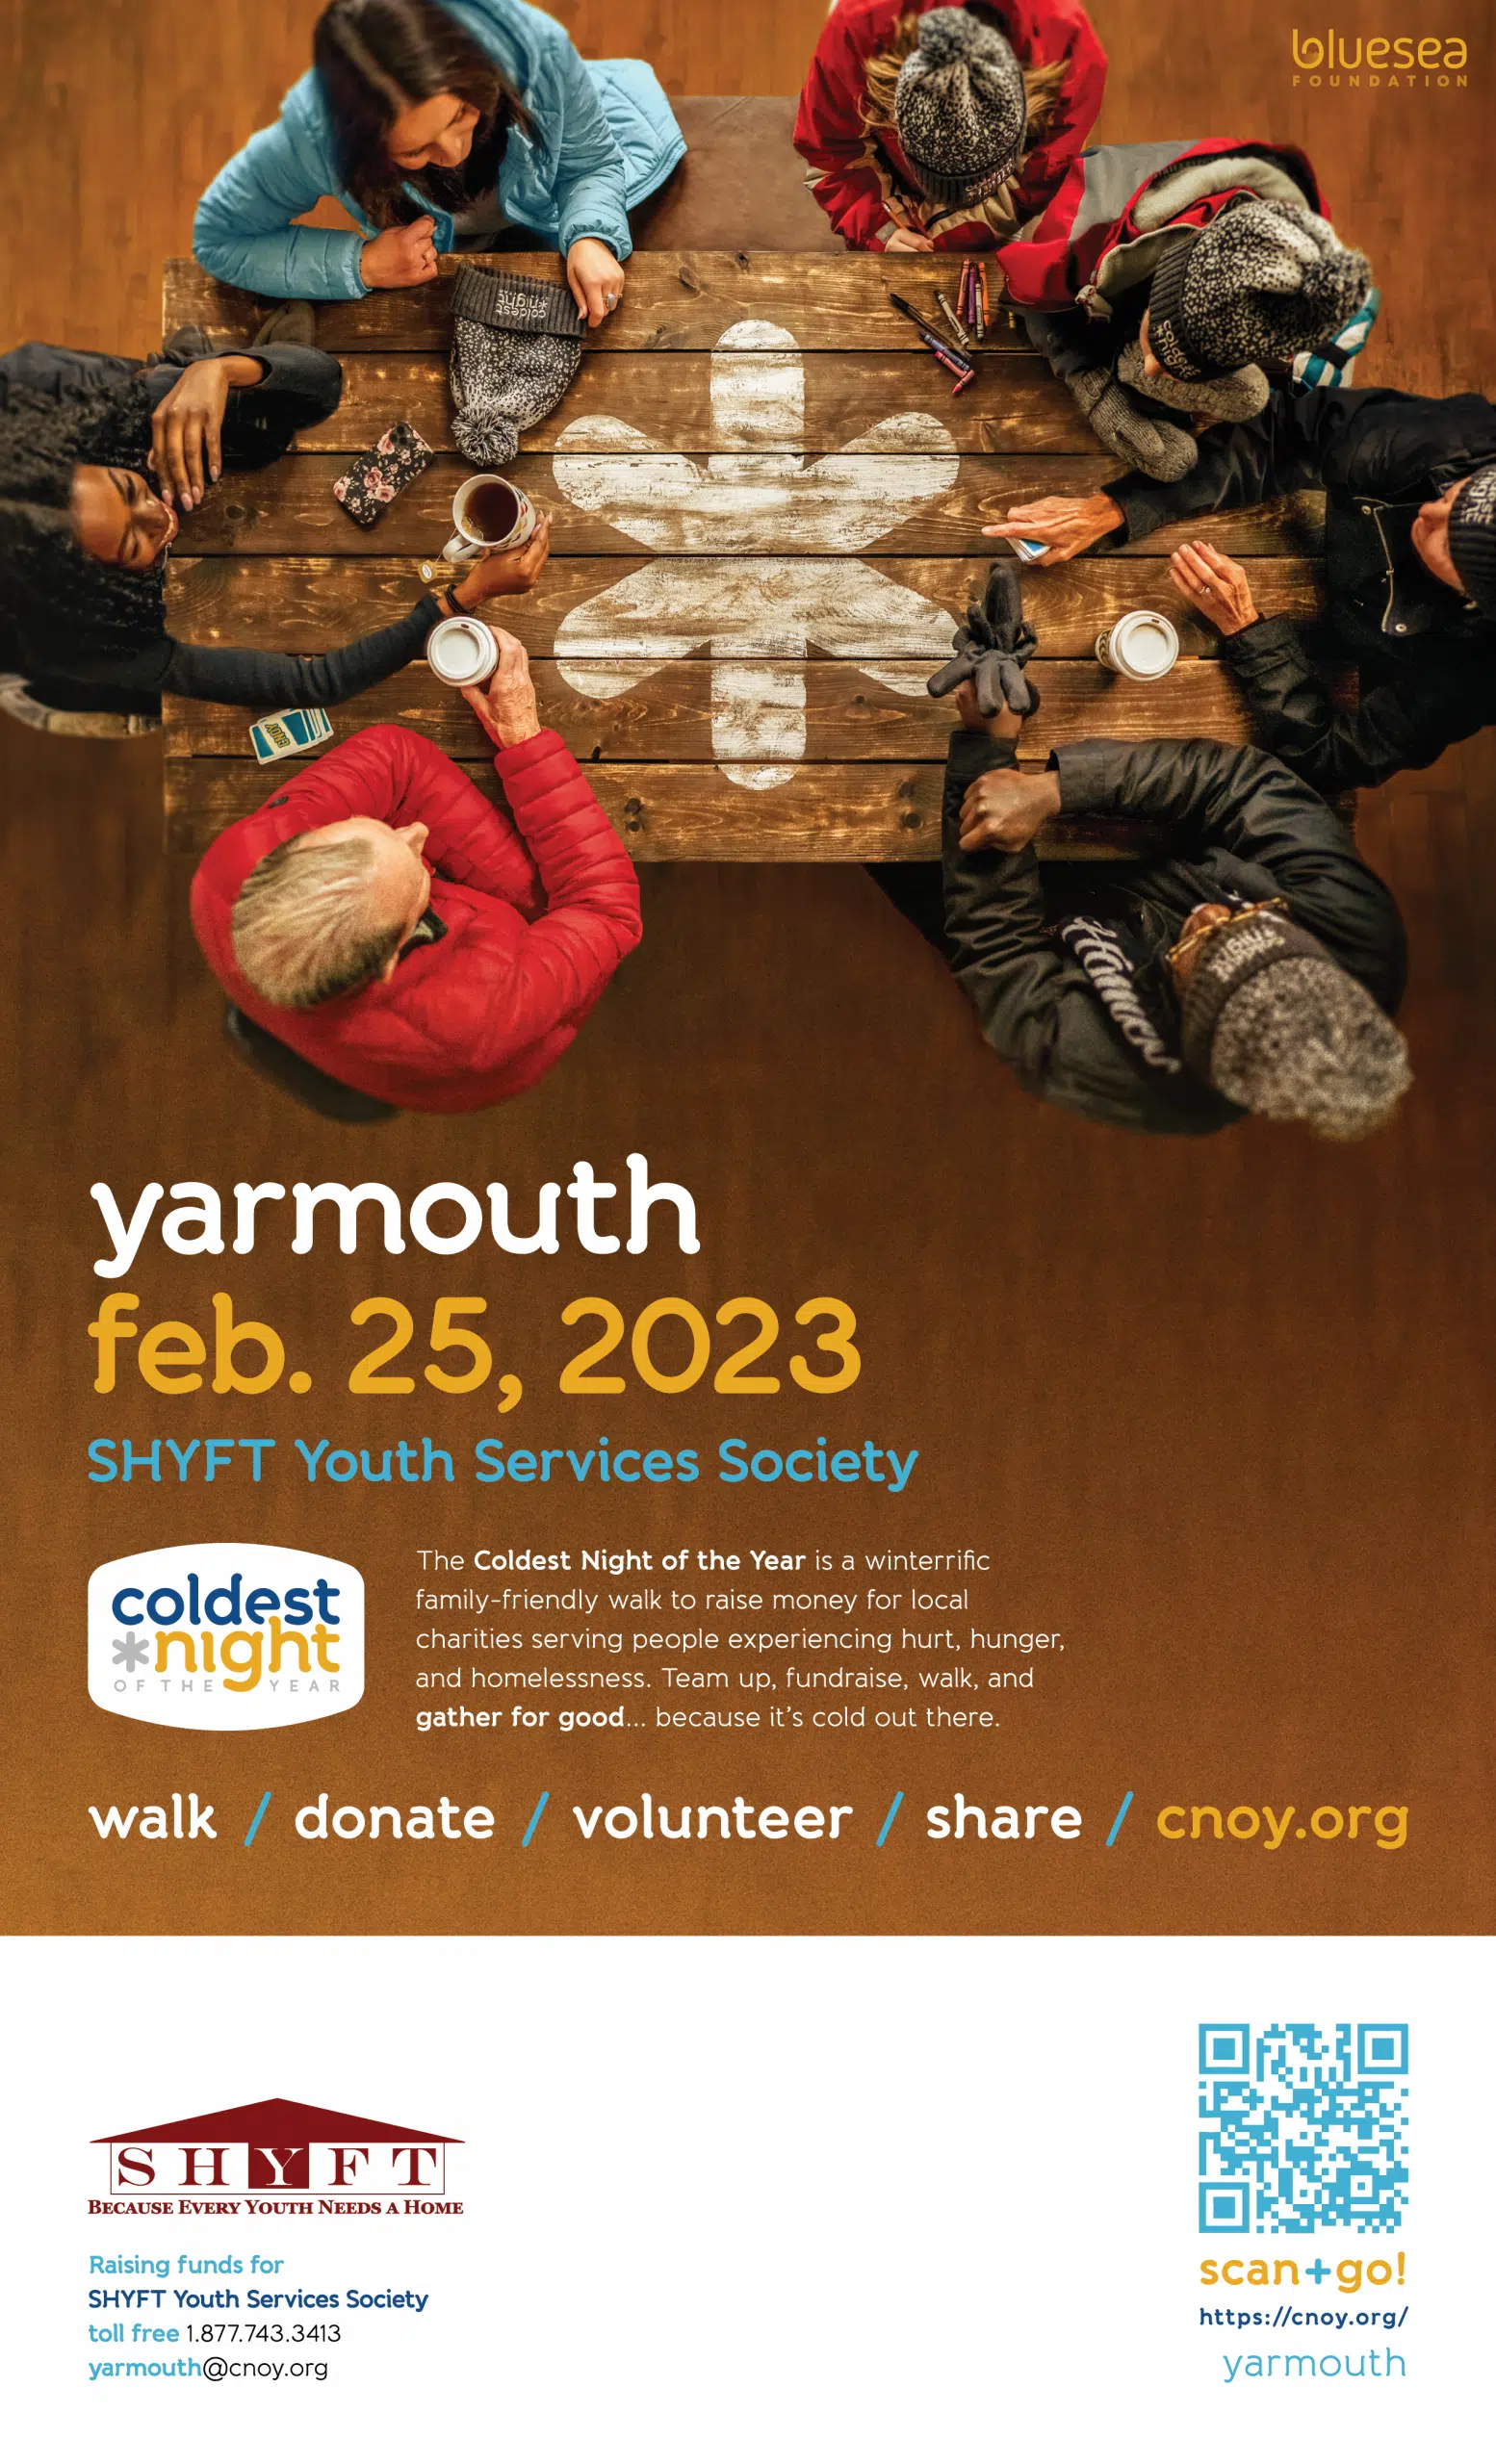 The Coldest Night of the Year is a winterrific family-friendly walk to raise money for local charities serving people experiencing hurt, hunger, and homelessness. Team up, fundraise, walk, and gather for good. It's taking place in Yarmouth  February 25th.